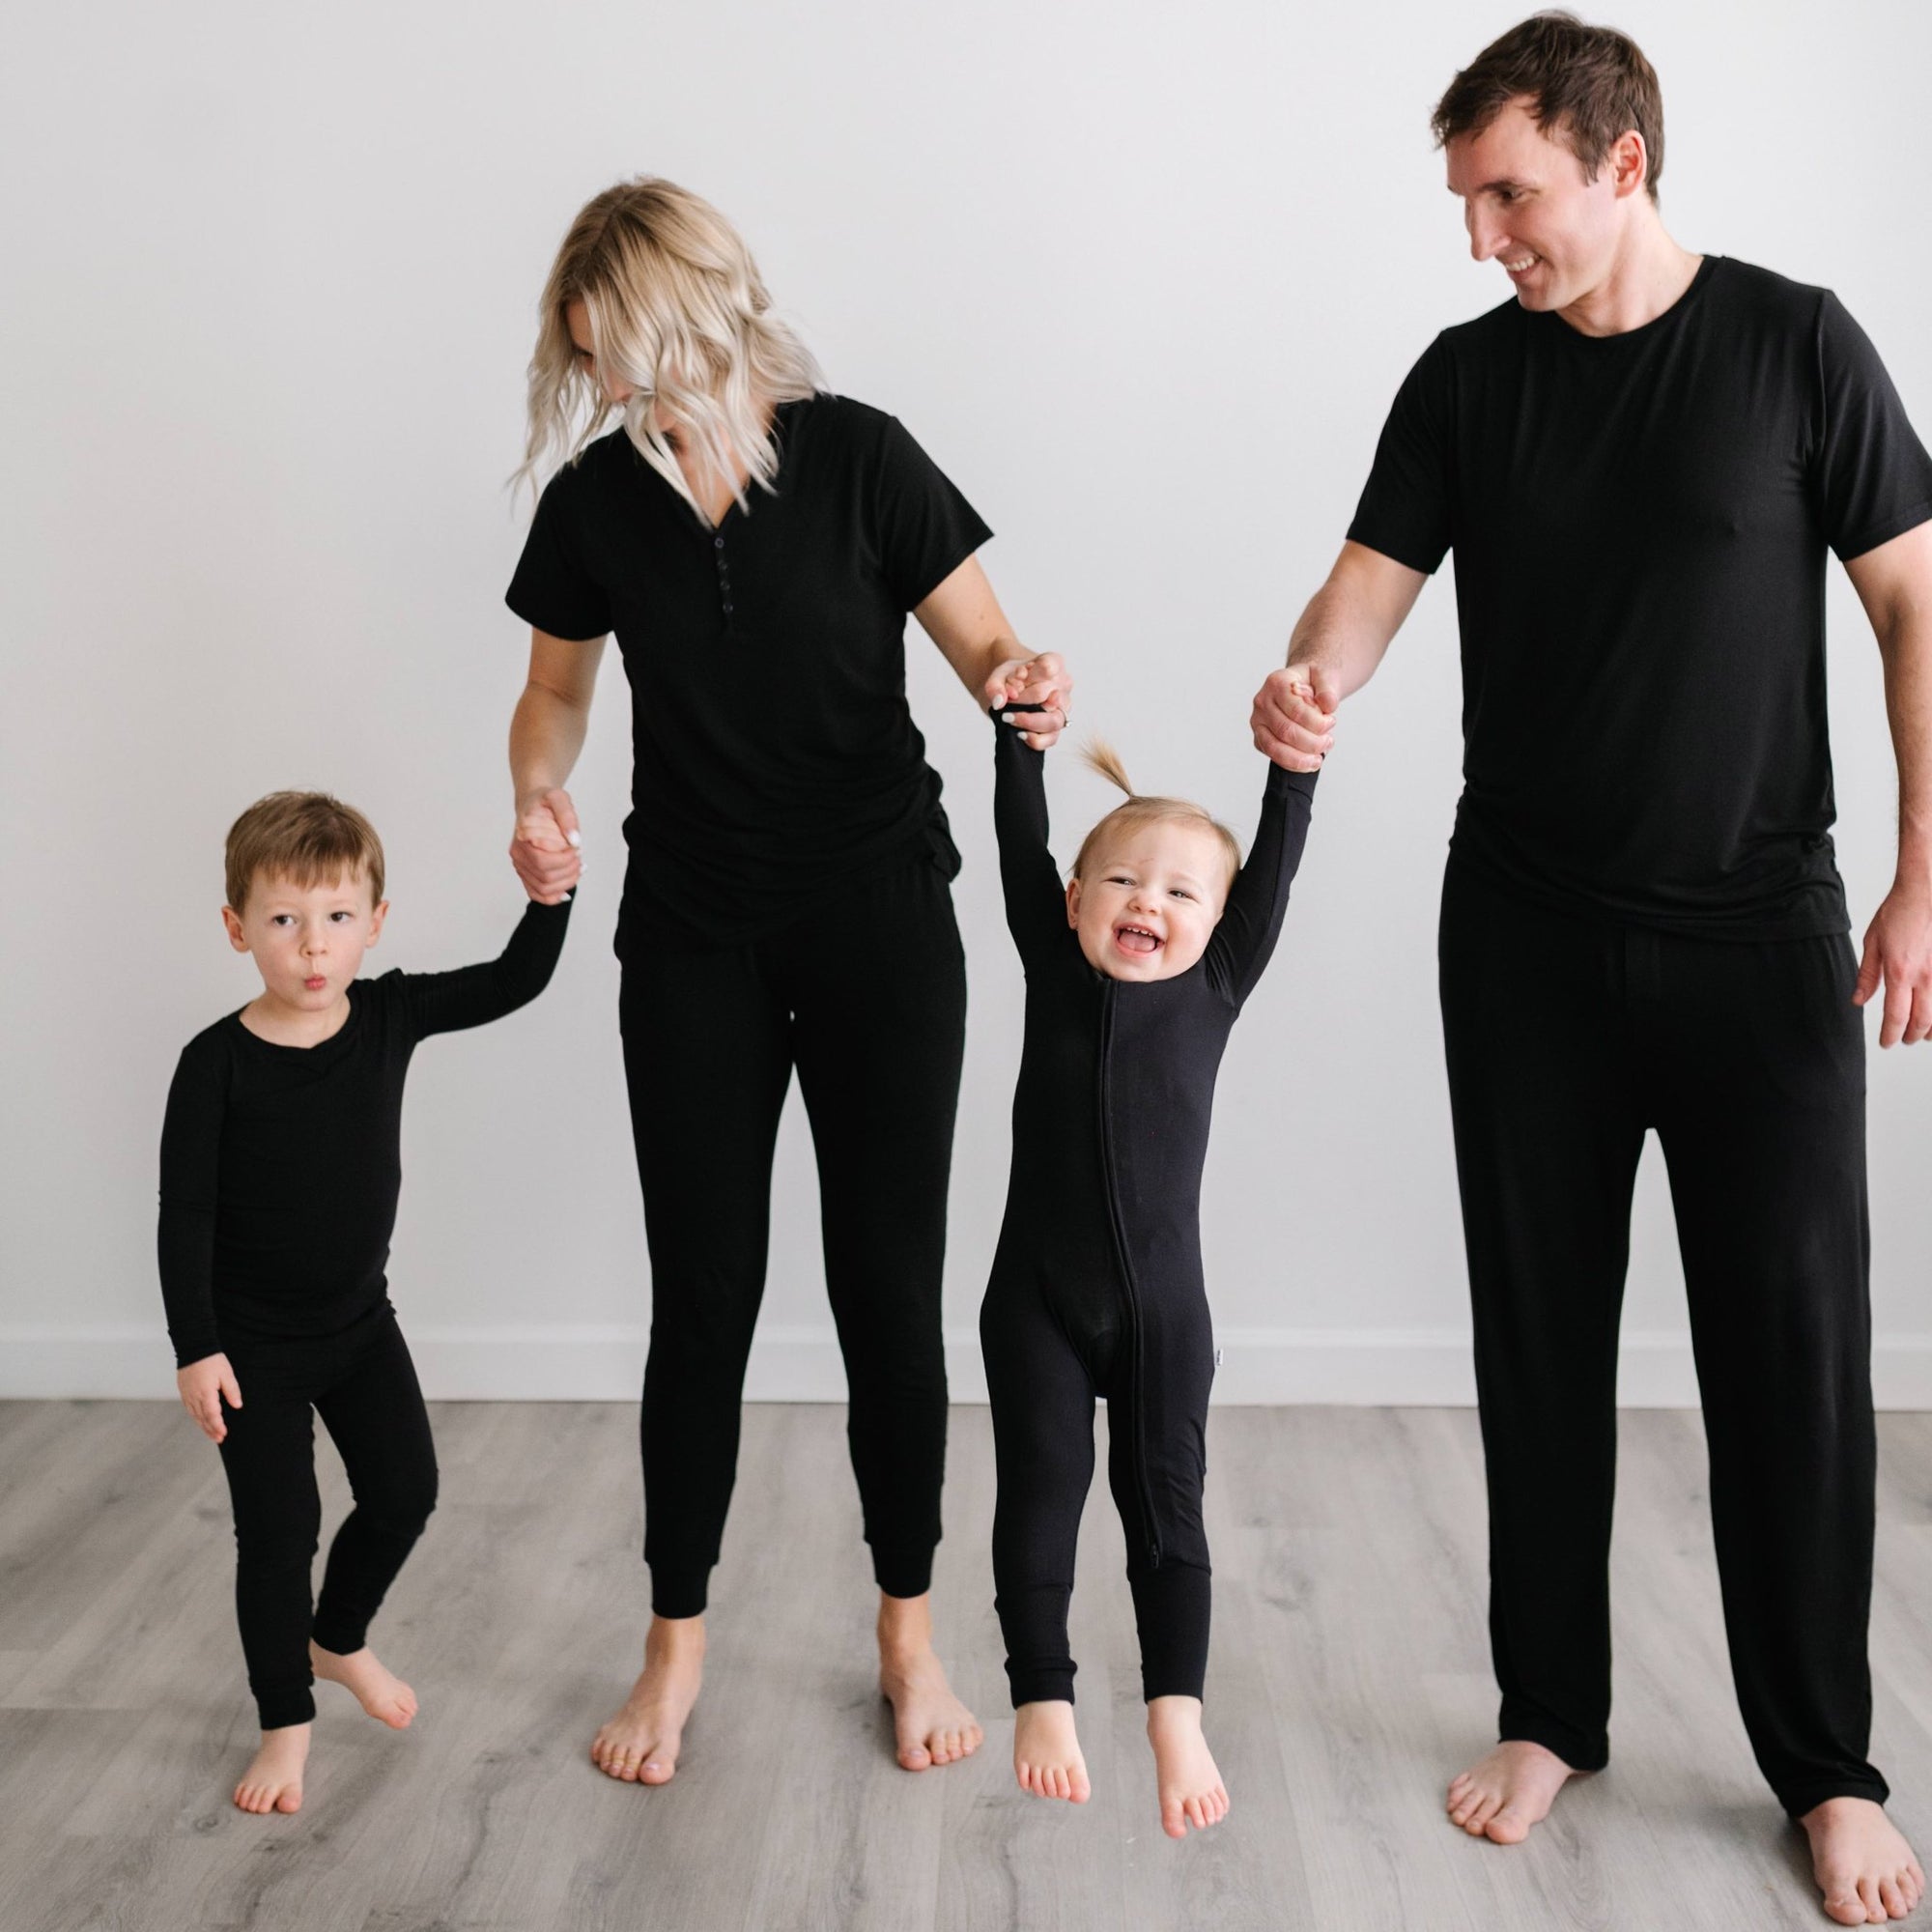 Image of family of 4 all holding hands. They are all wearing matching solid black pajamas. The mom and dad are both shown wearing solid black short sleeve pj tops with matching solid black pj pants, the son is shown wearing a long sleeve pajama set, and t